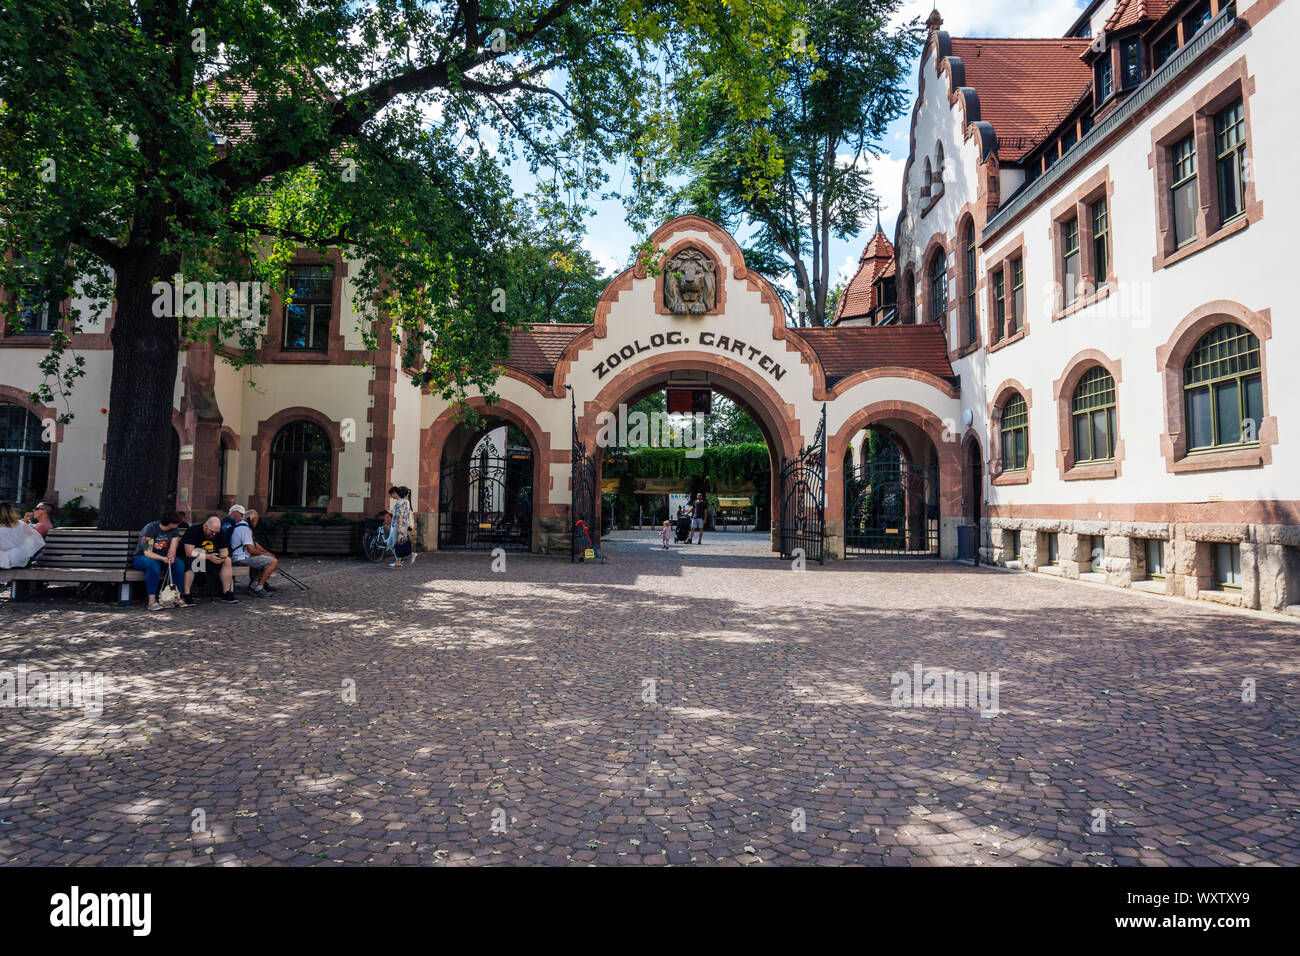 Leipzig German July 09 2018: The open gate of the Leipzig Zoo with a father and child entering while beside the entrance on a bench people in the sun Stock Photo